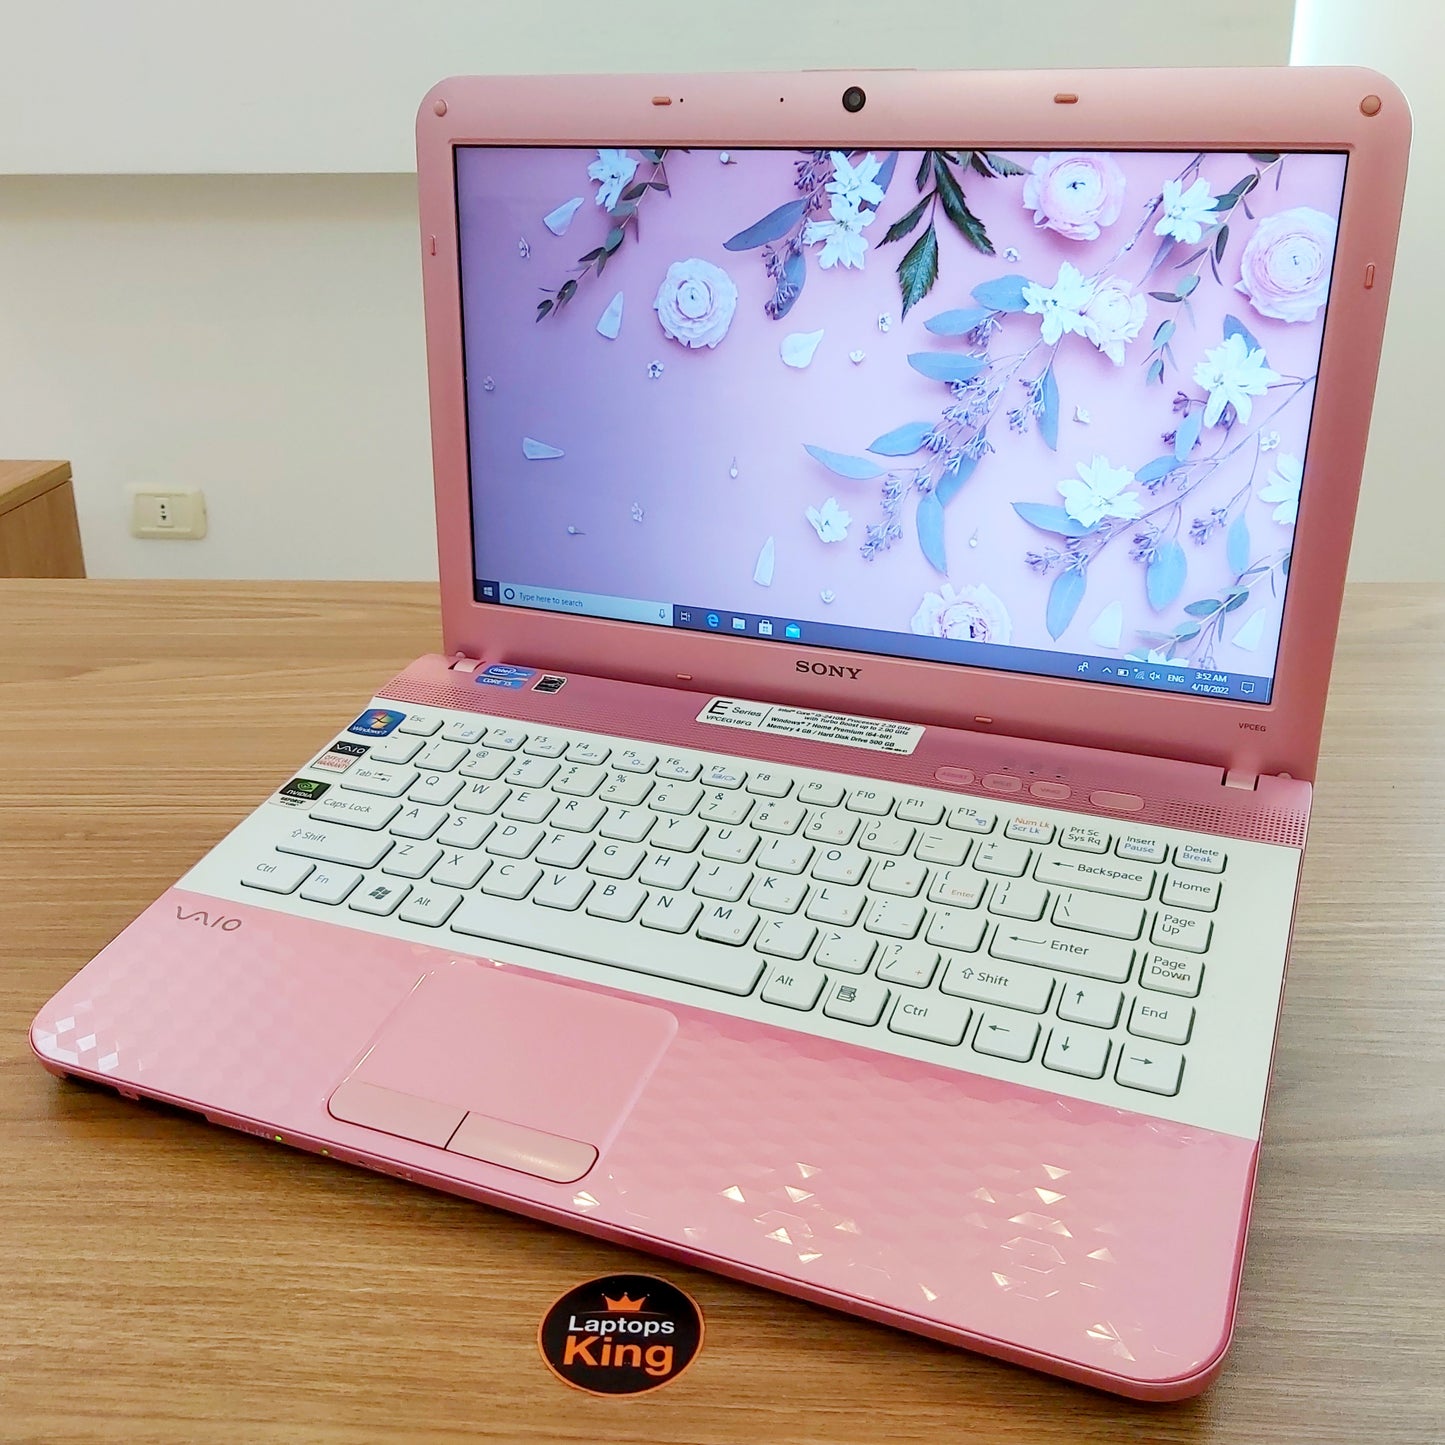 Sony Vaio i5 GeForce 410m Pink Edition Laptop (Used Very Clean)